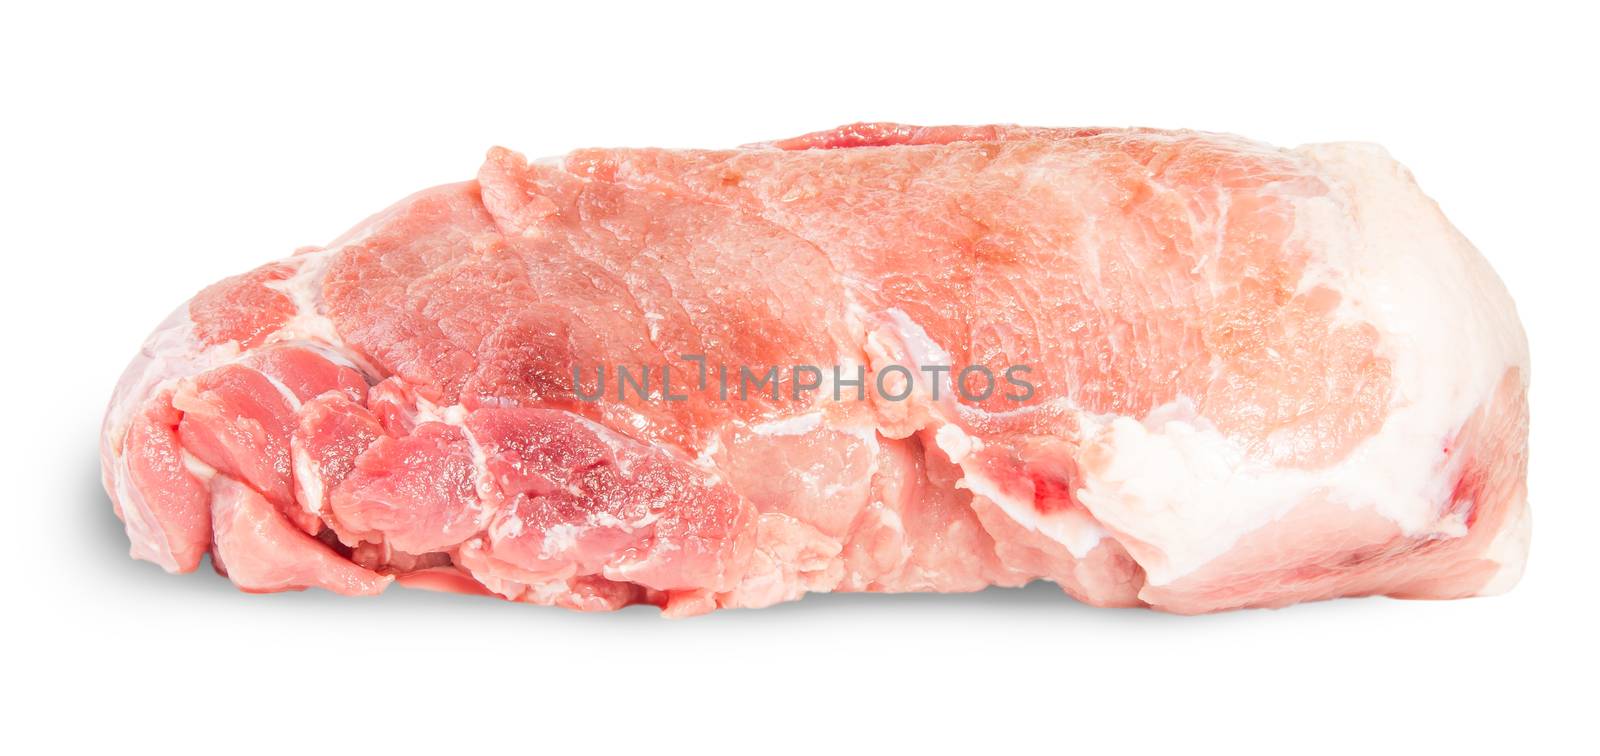 Raw Pork Fillet Isolated On White Background